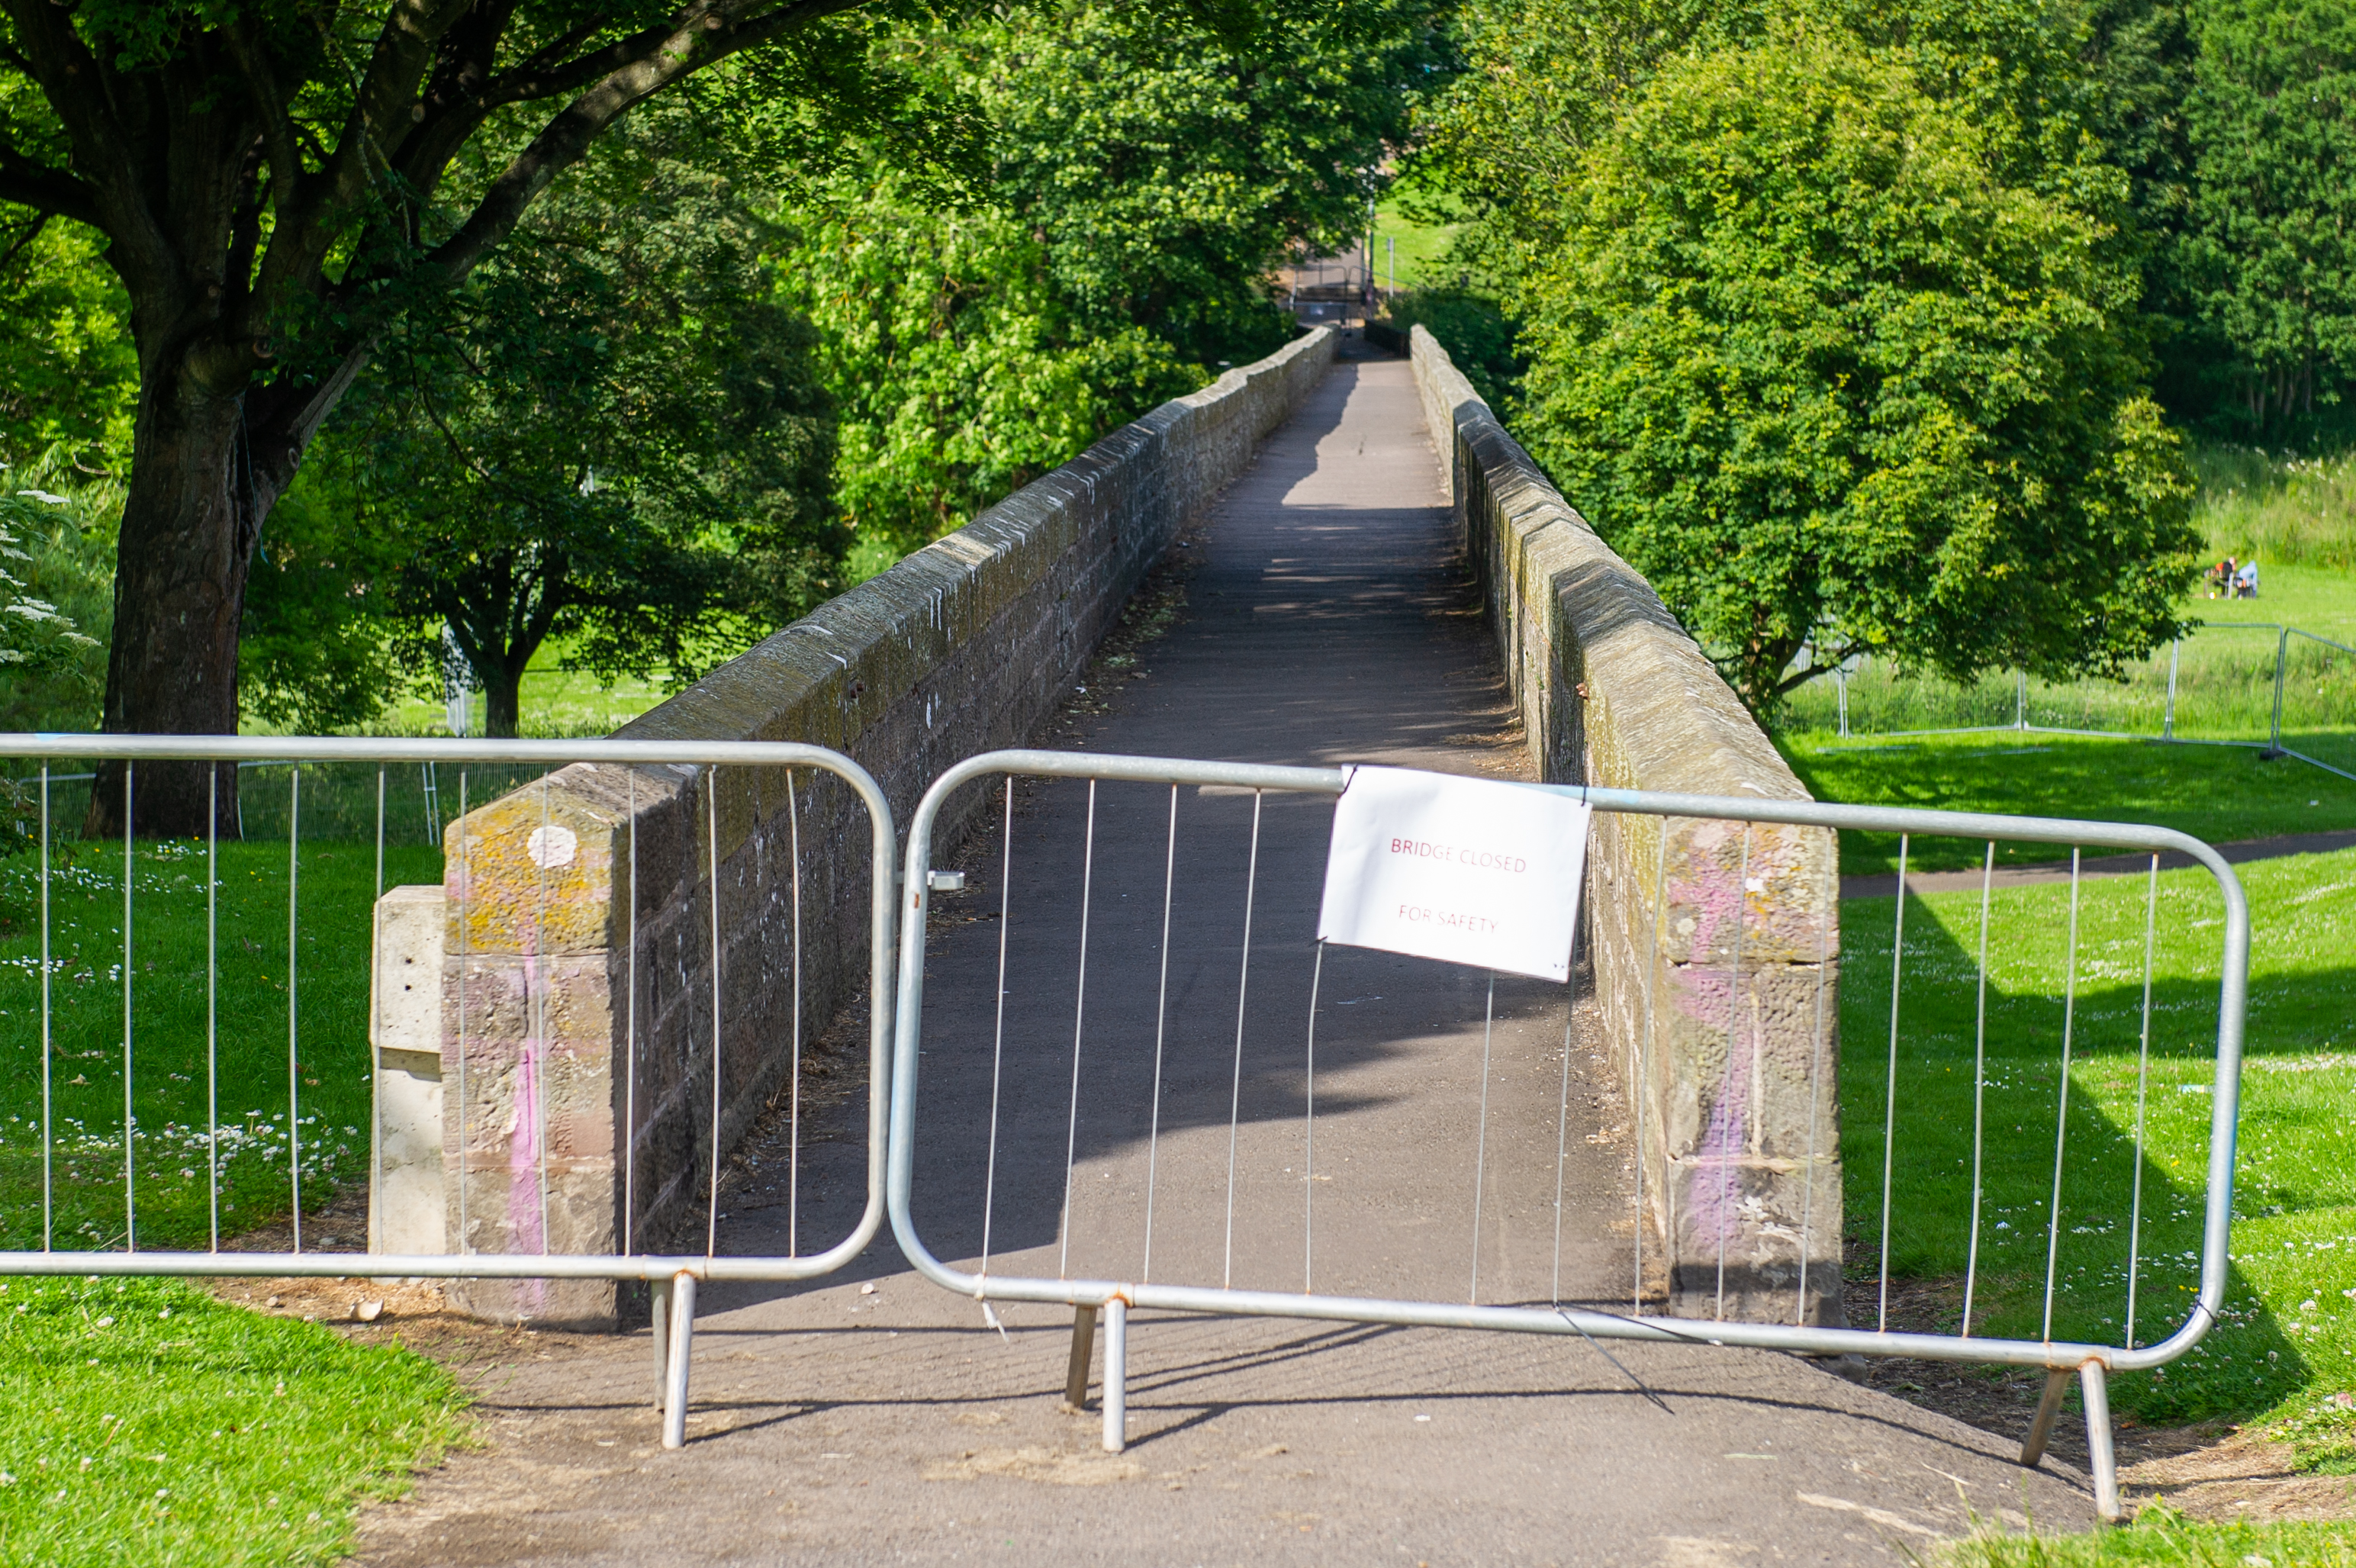 The bridge in Finlathen Park is closed off as one of the walls is bulging out.